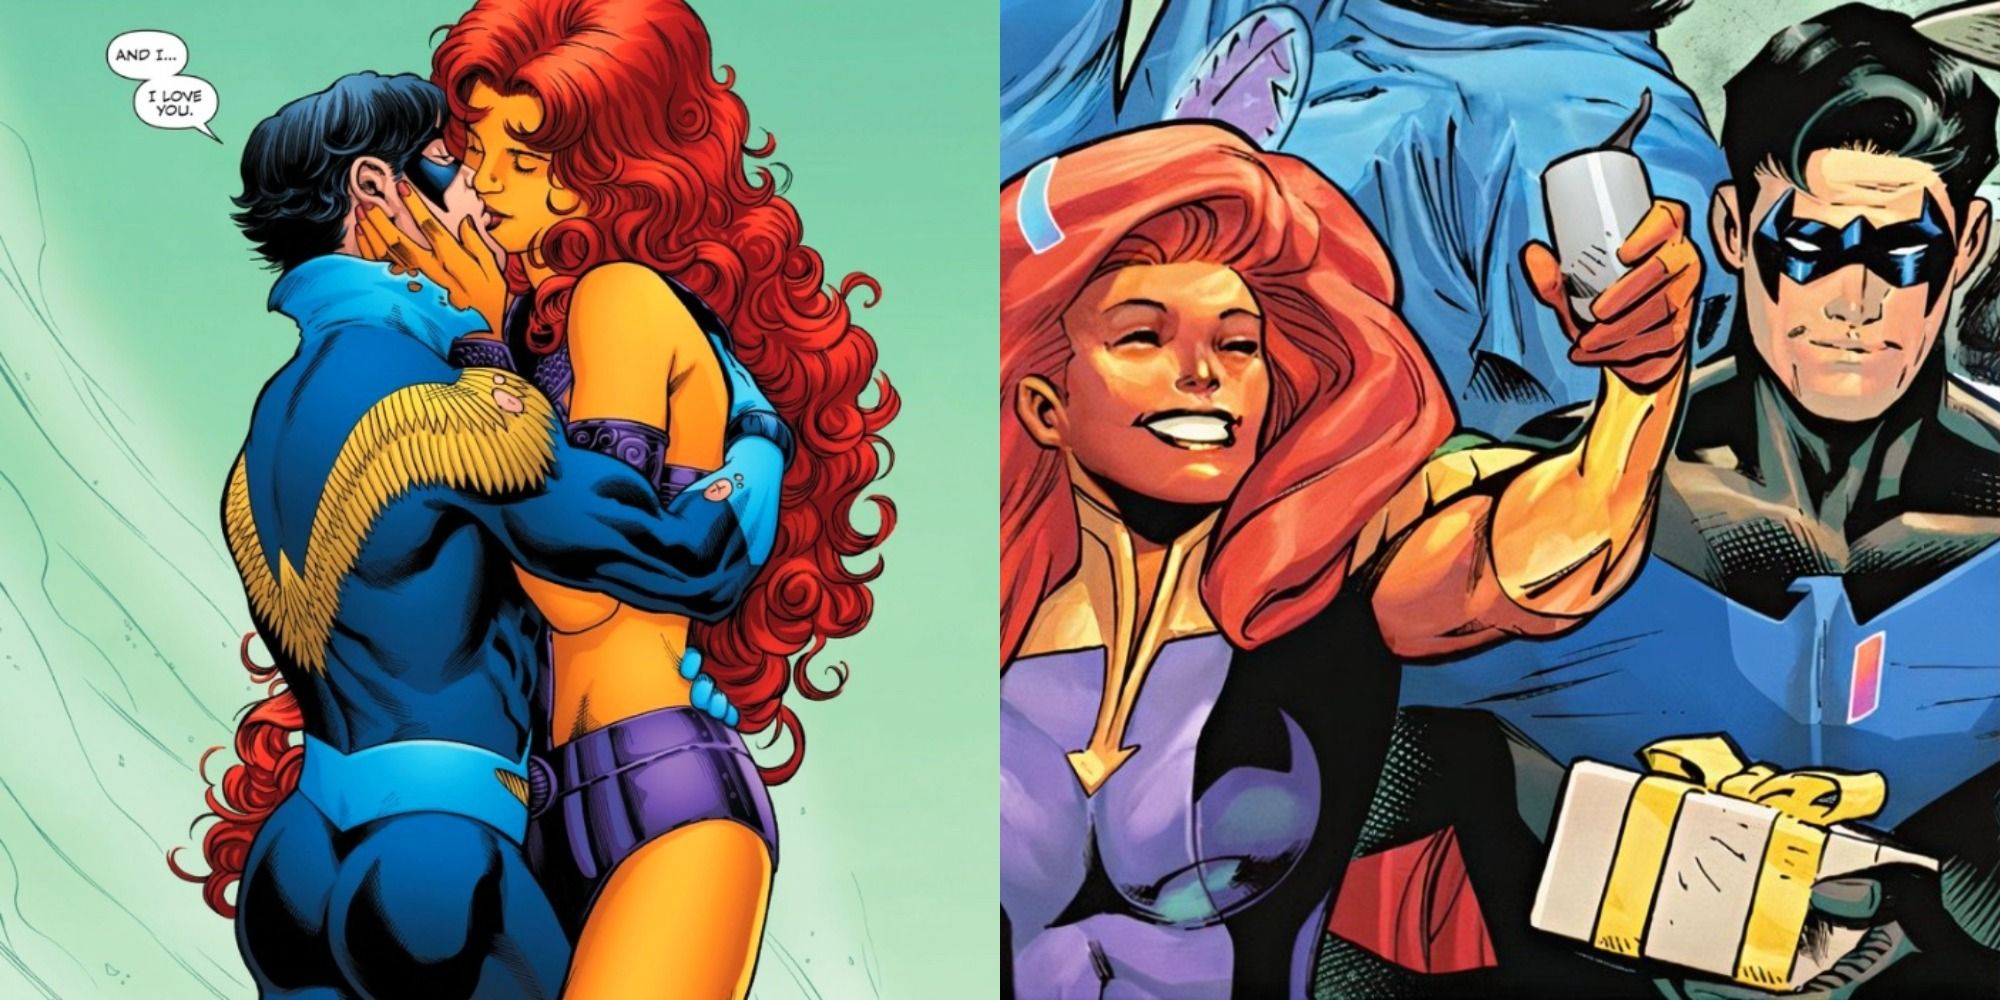 Things Only Comic Book Fans Know About Nightwing Starfire S Relationship